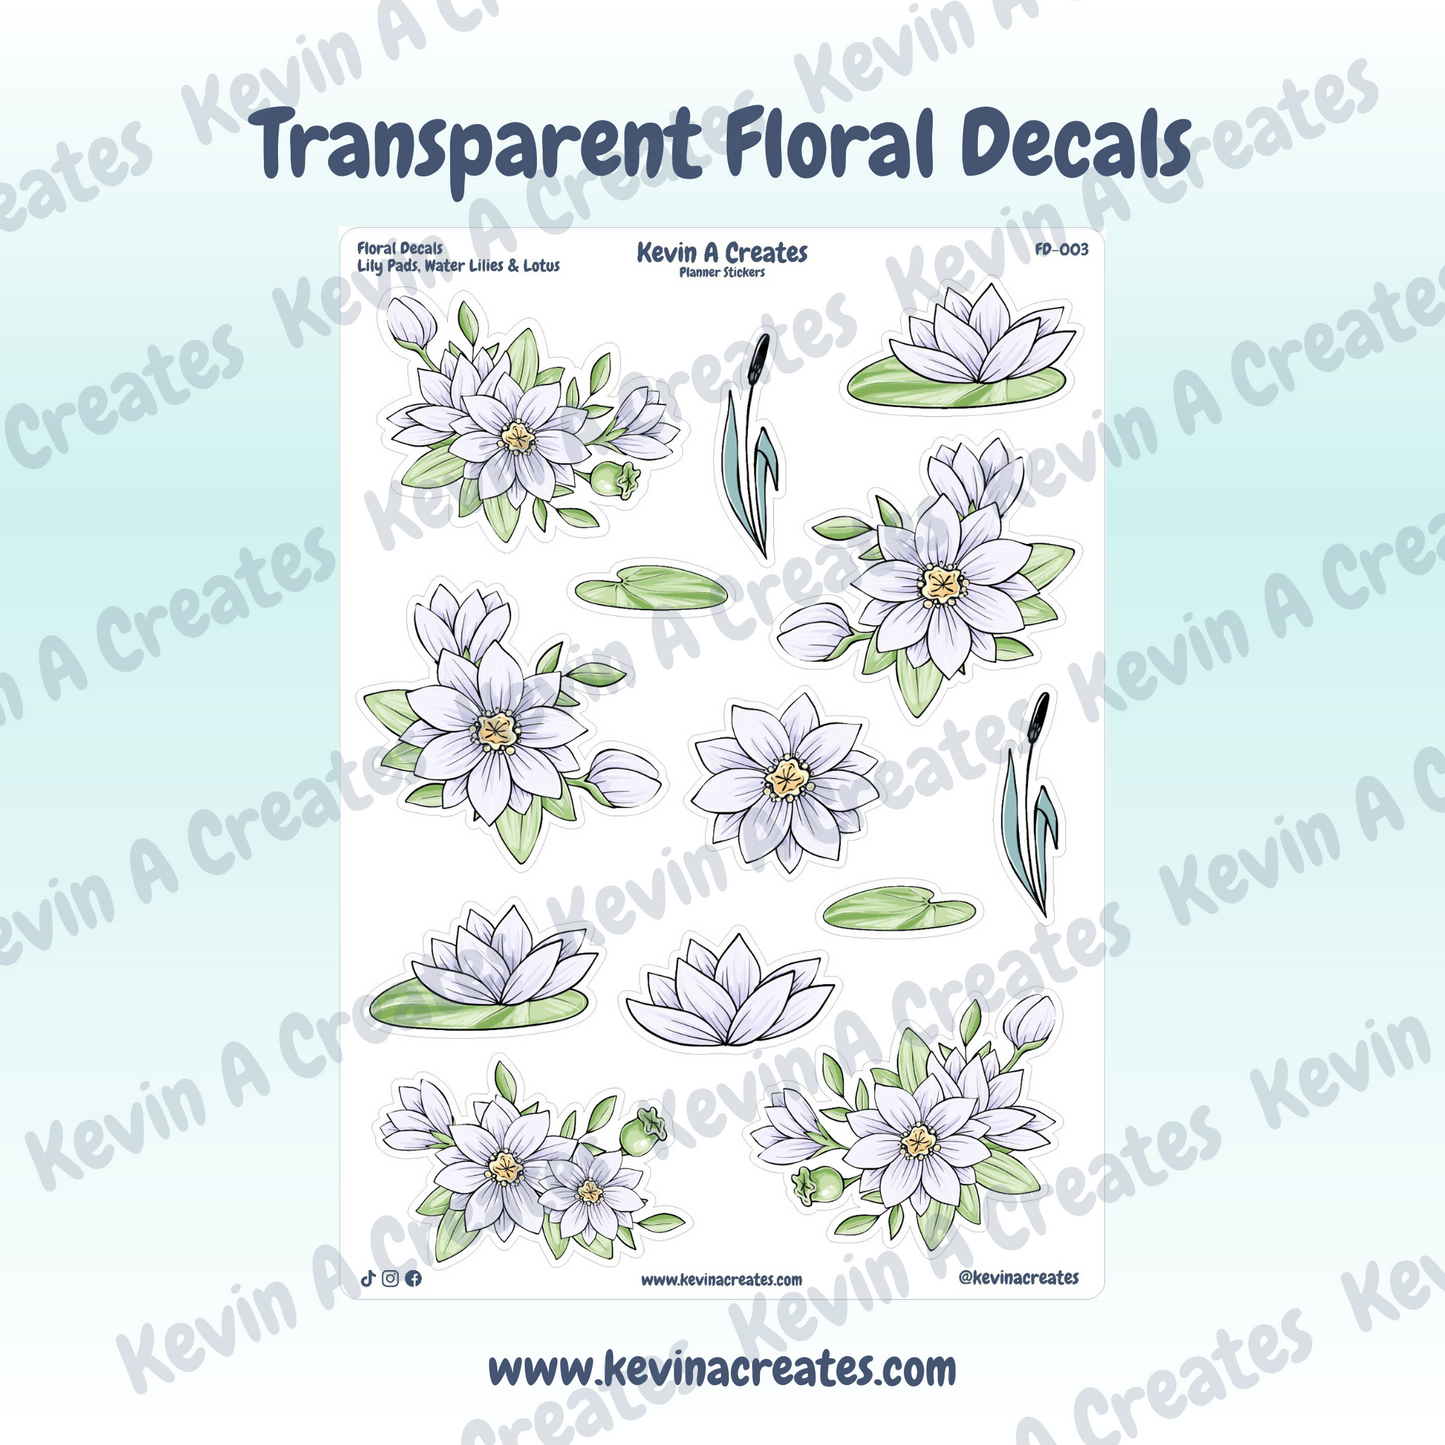 Transparent Lily Pads, Water Lilies, & Lotus Floral Sticker Sheet